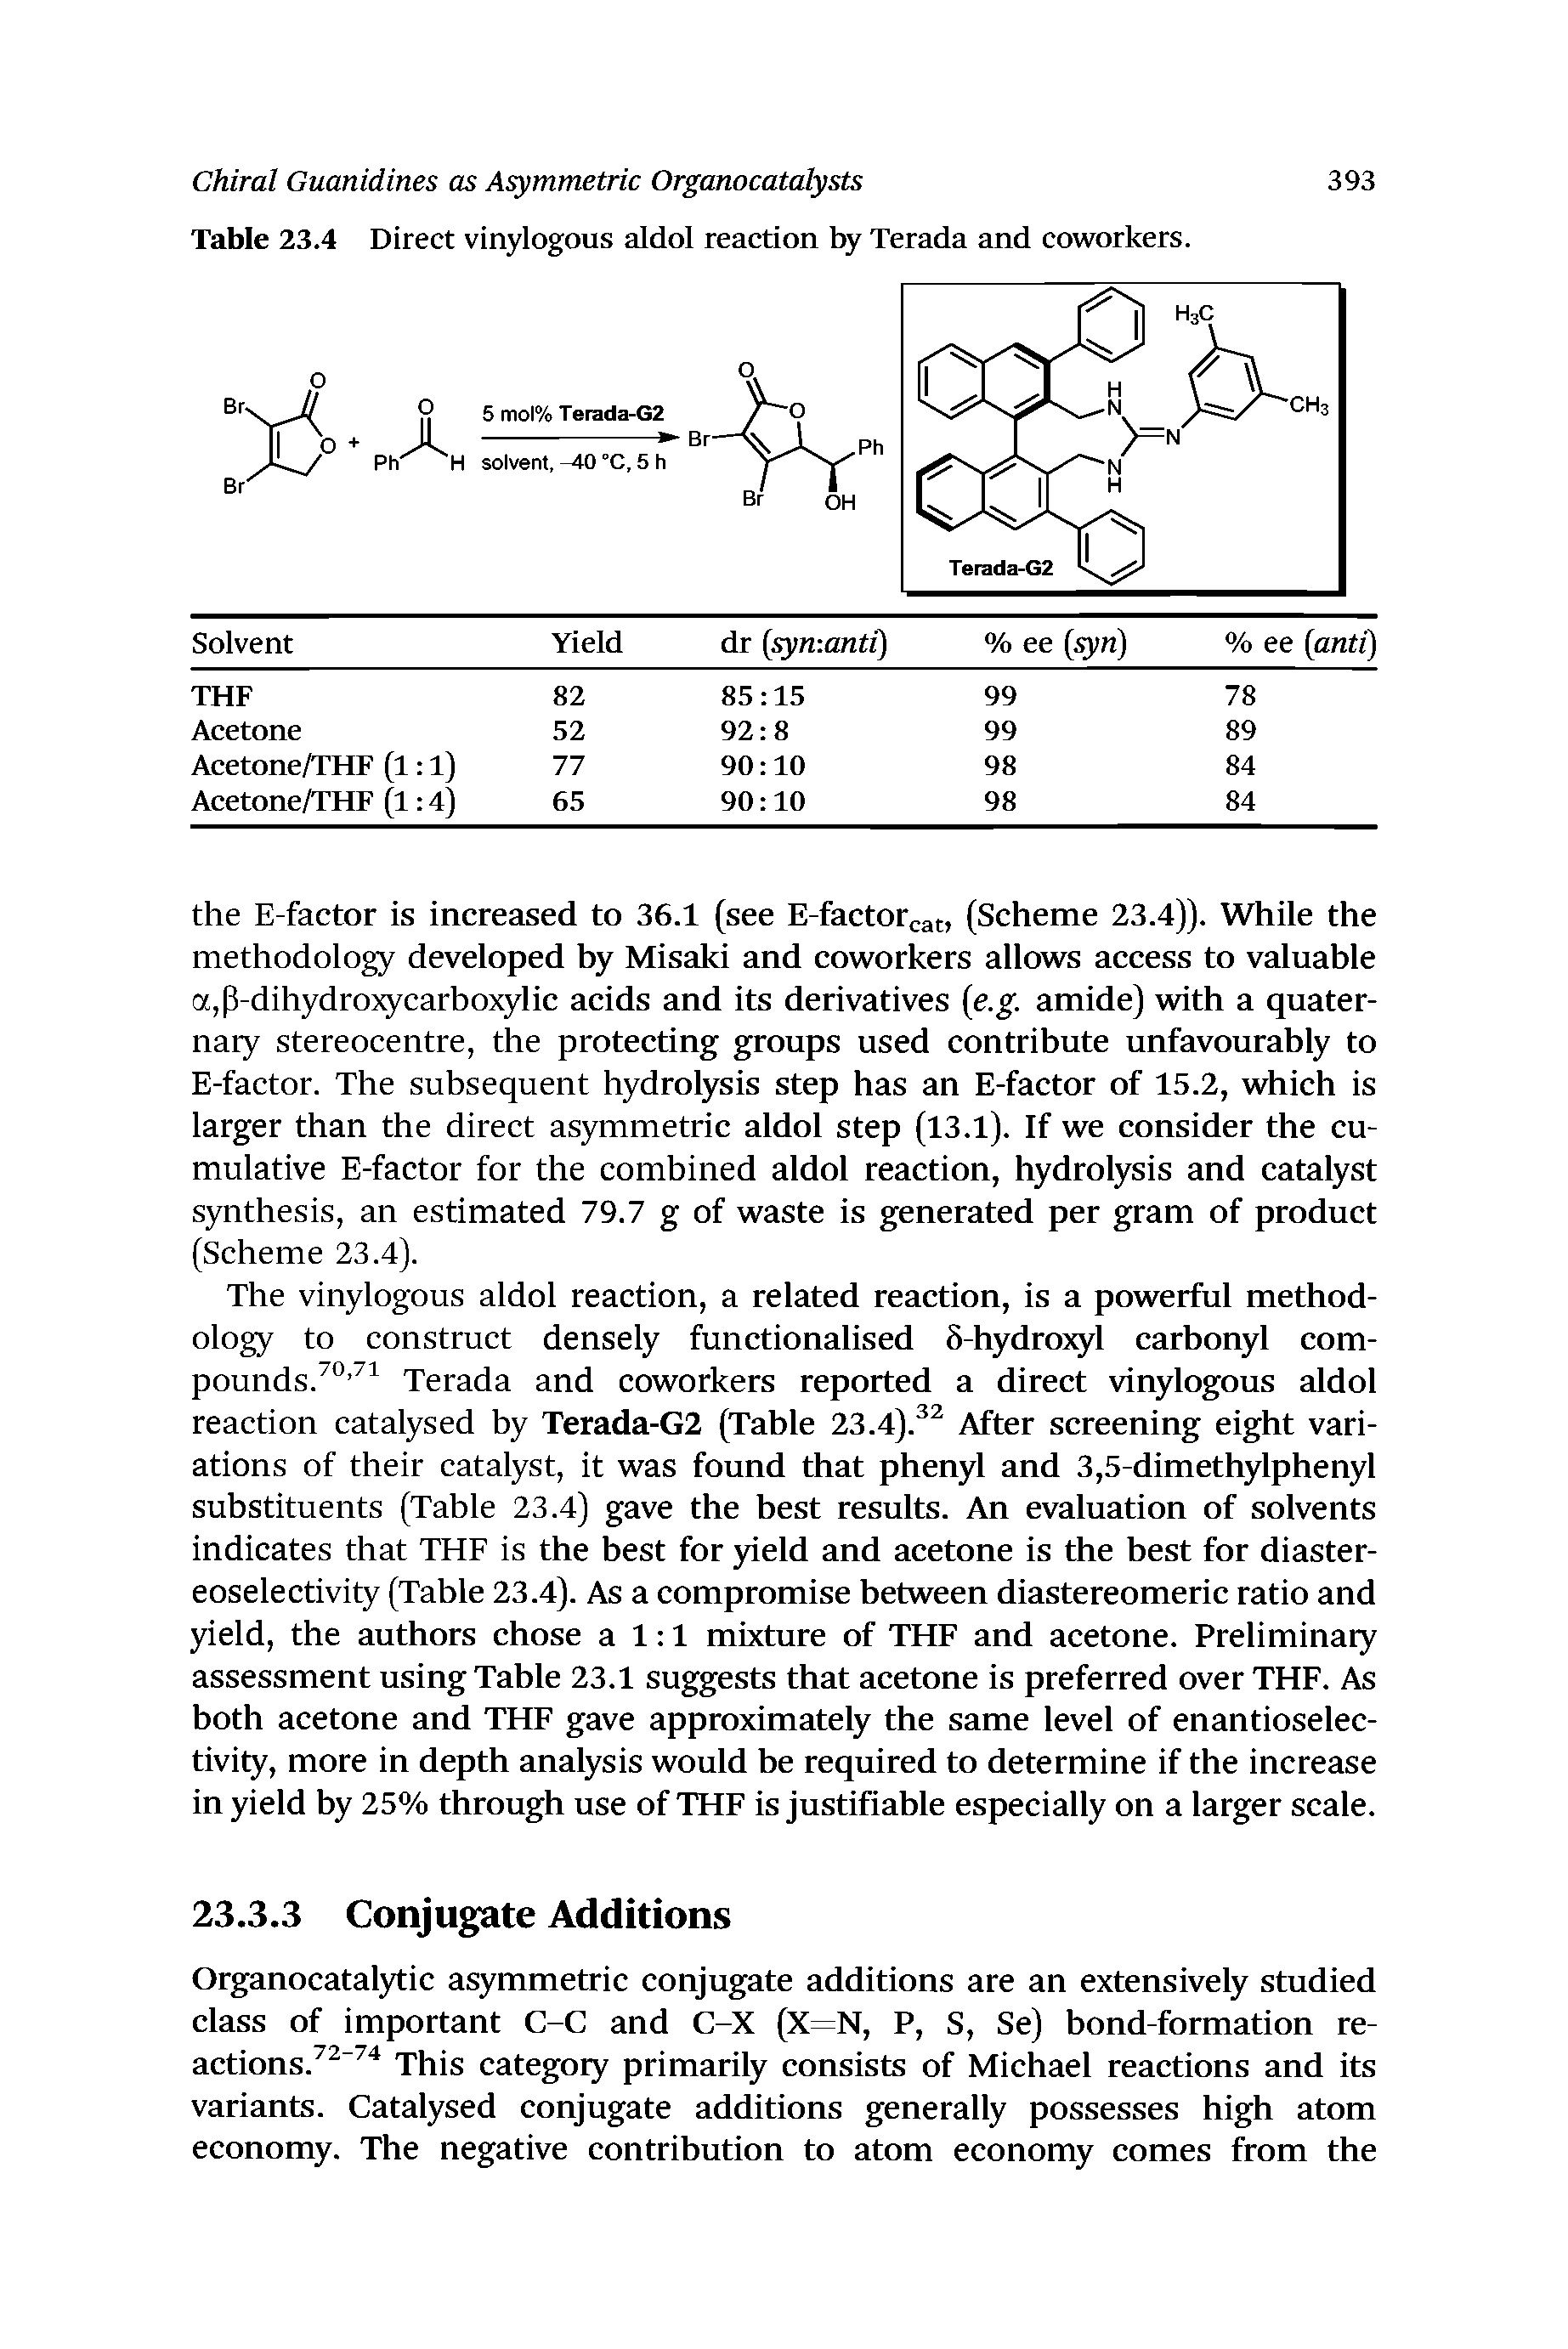 Table 23.4 Direct vinylogous aldol reaction by Terada and coworkers.